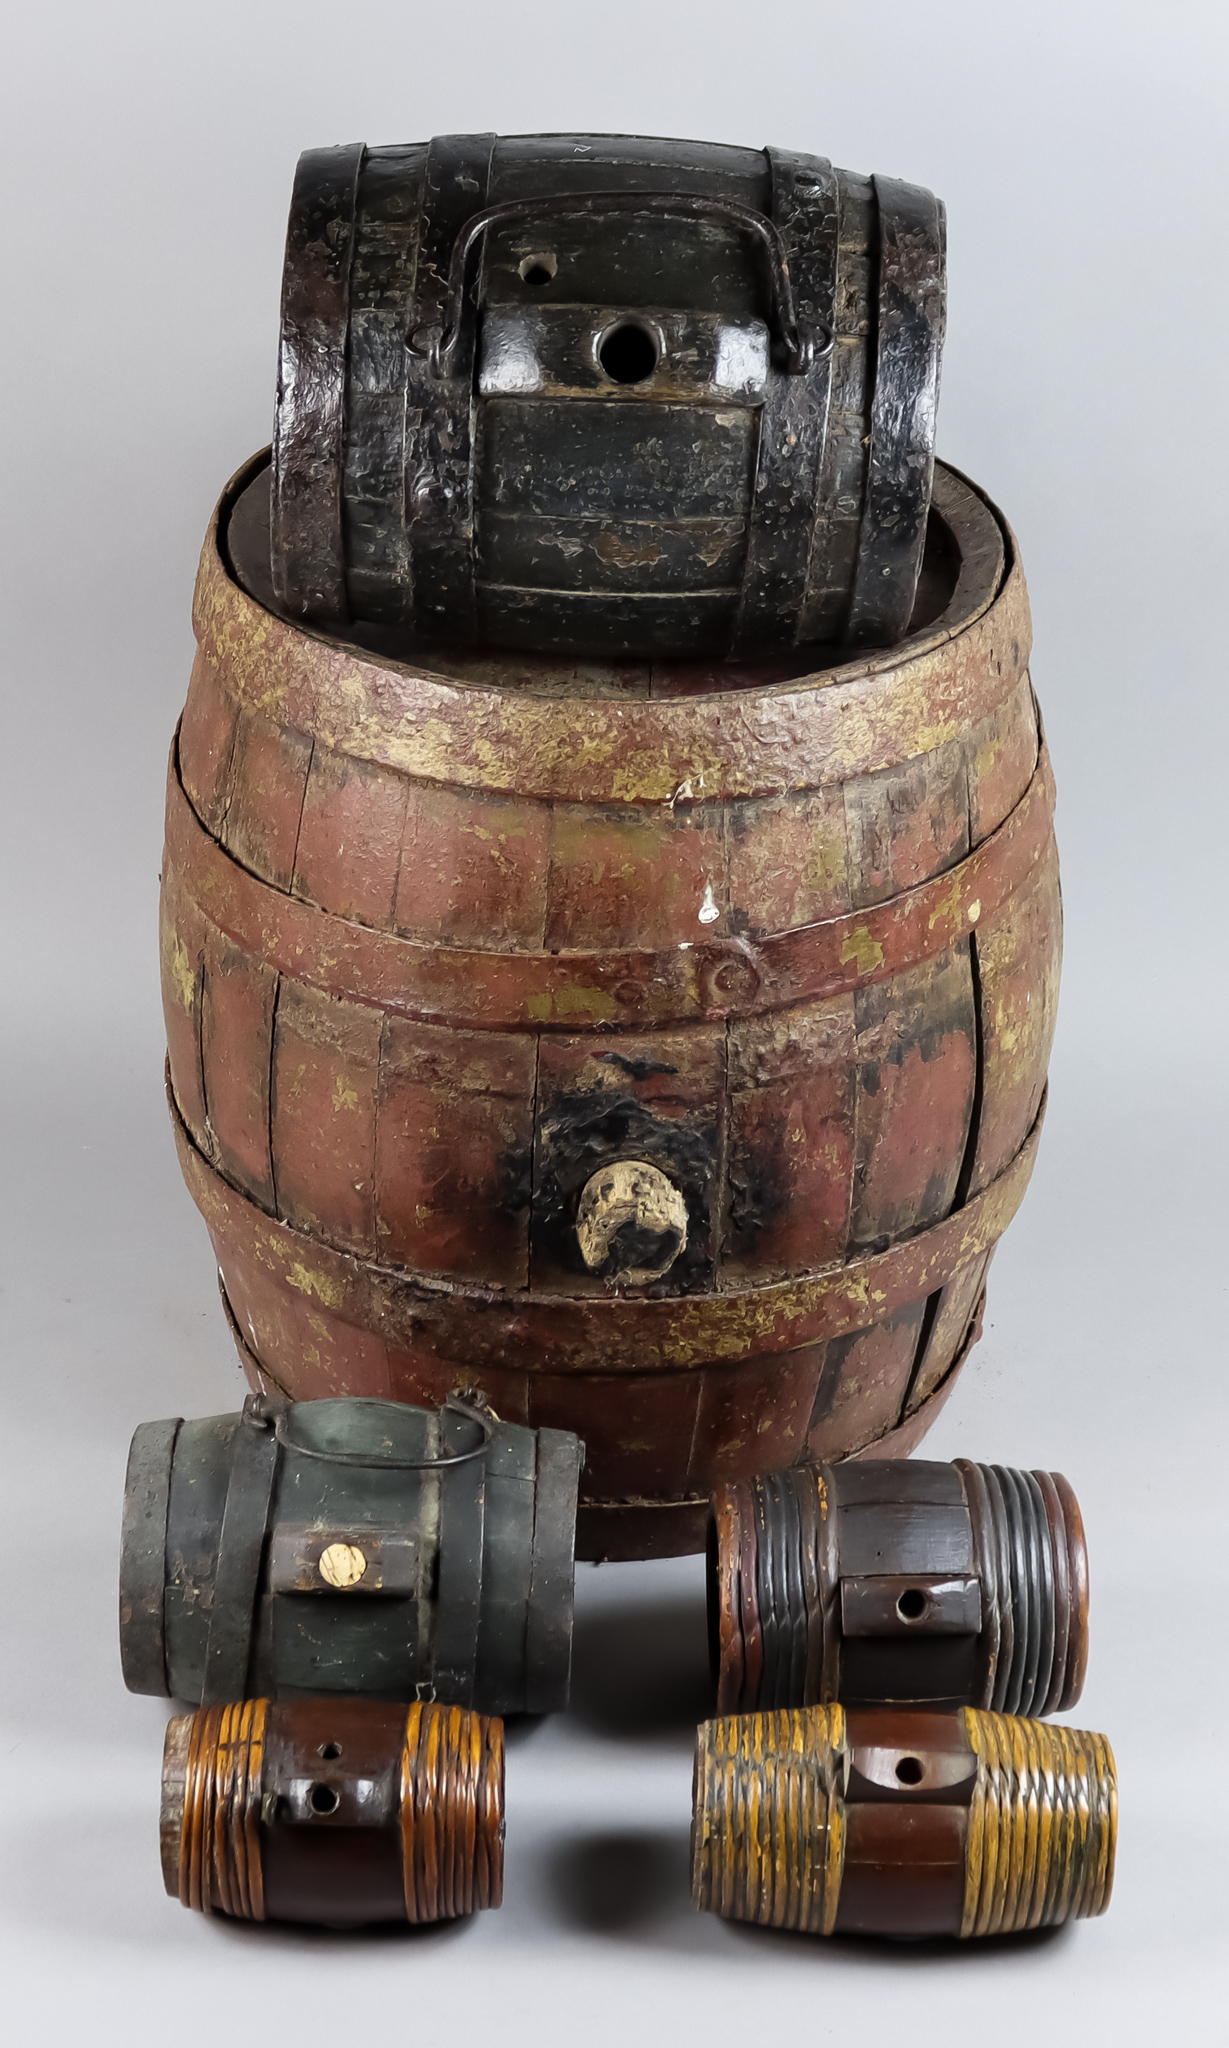 A Coopered Barrel, 19th Century, with original red paint, 11.5ins diameter x 12.75ins long, a 19th